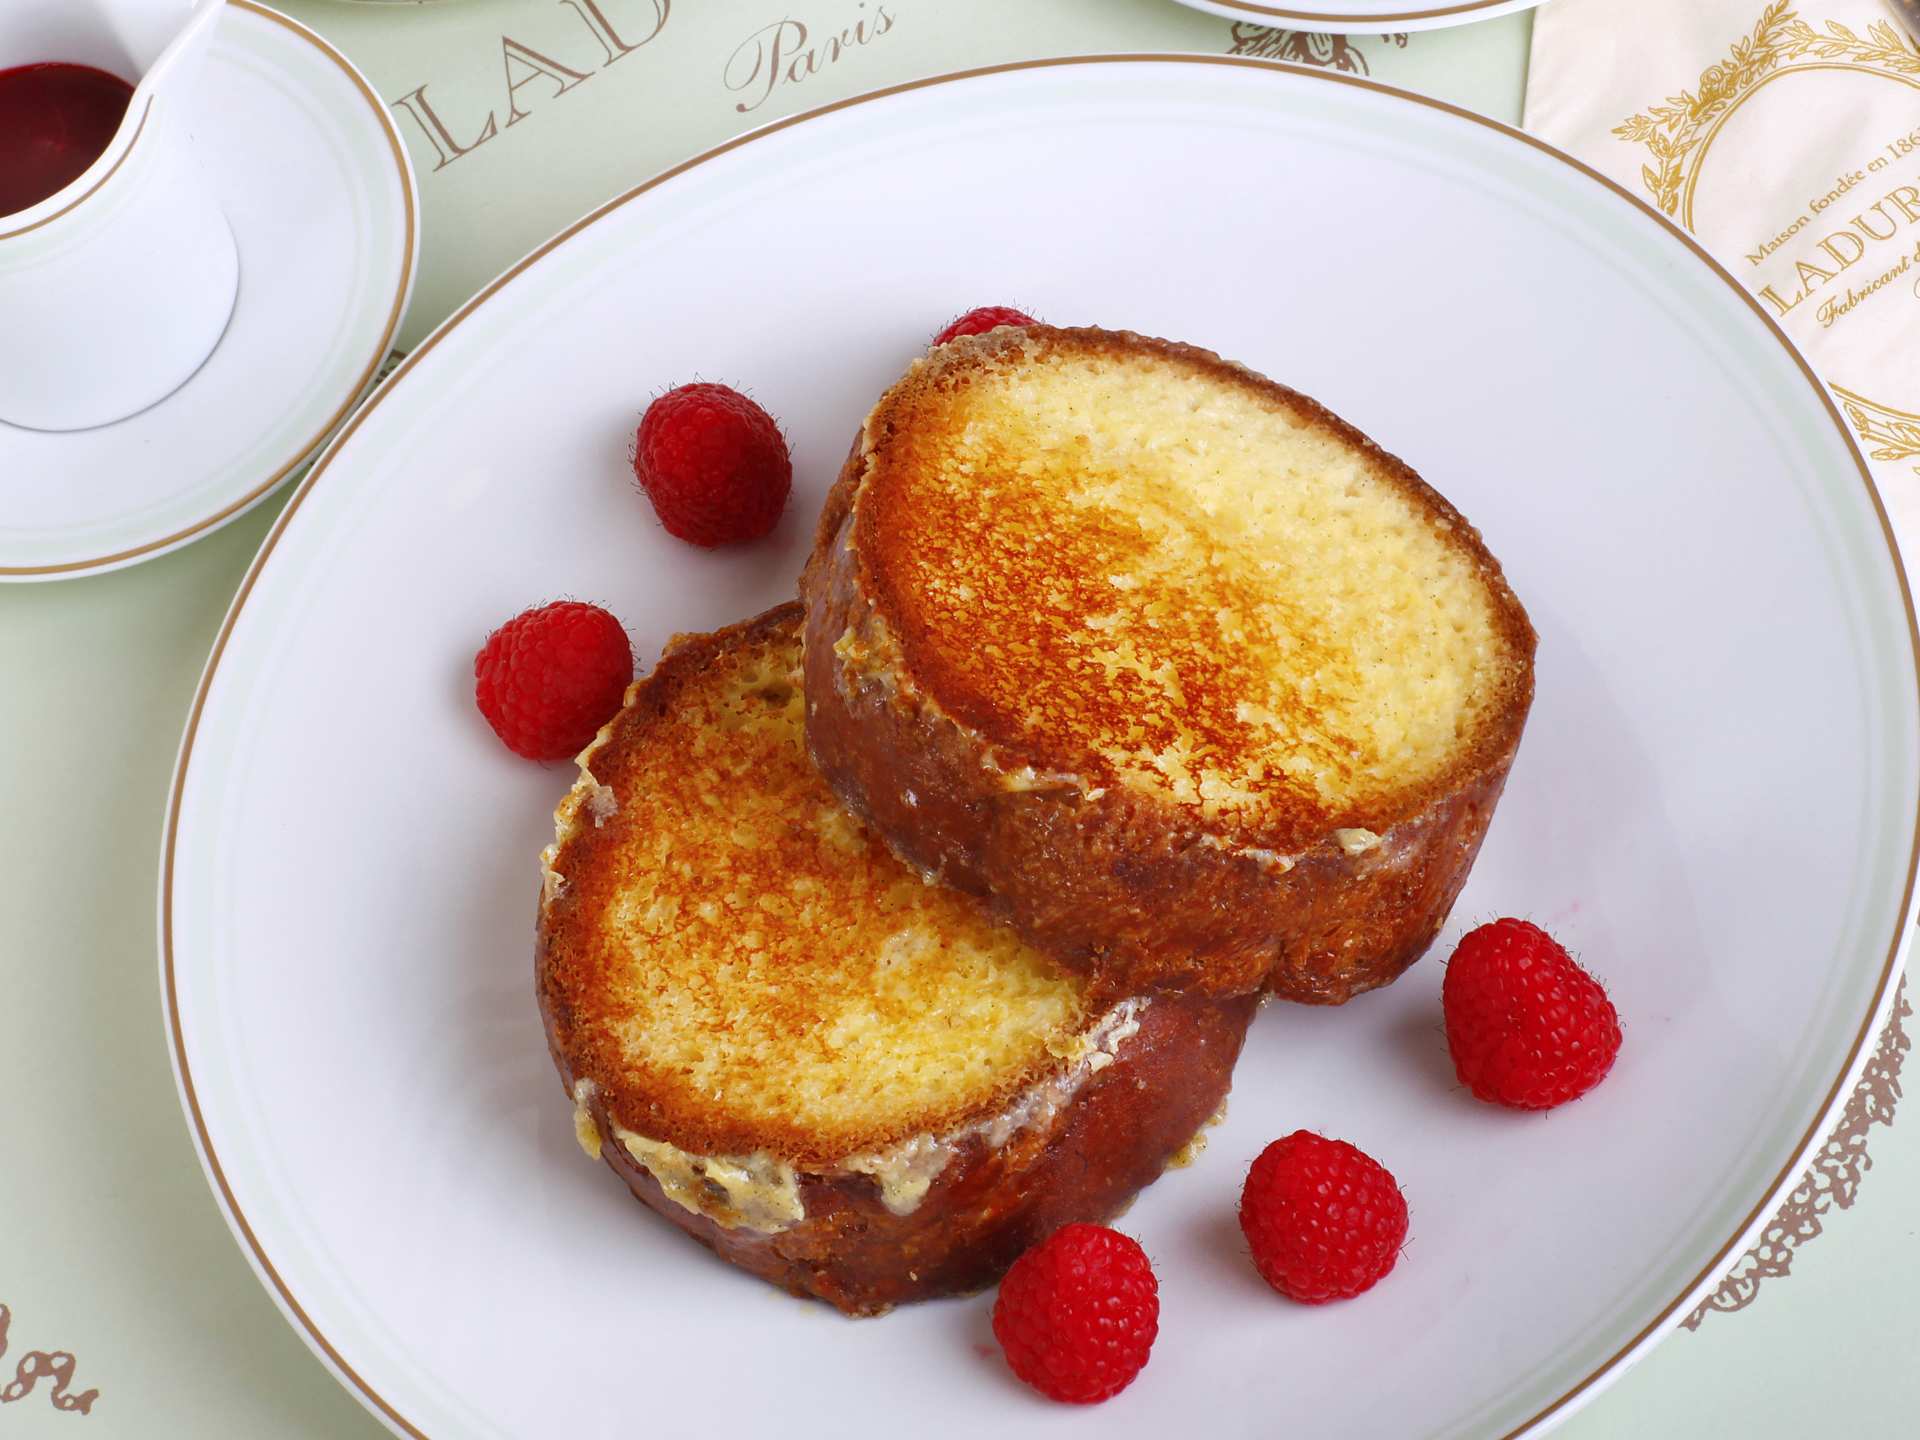 Best brunch in Toronto | French toast at Ladurée Yorkdale